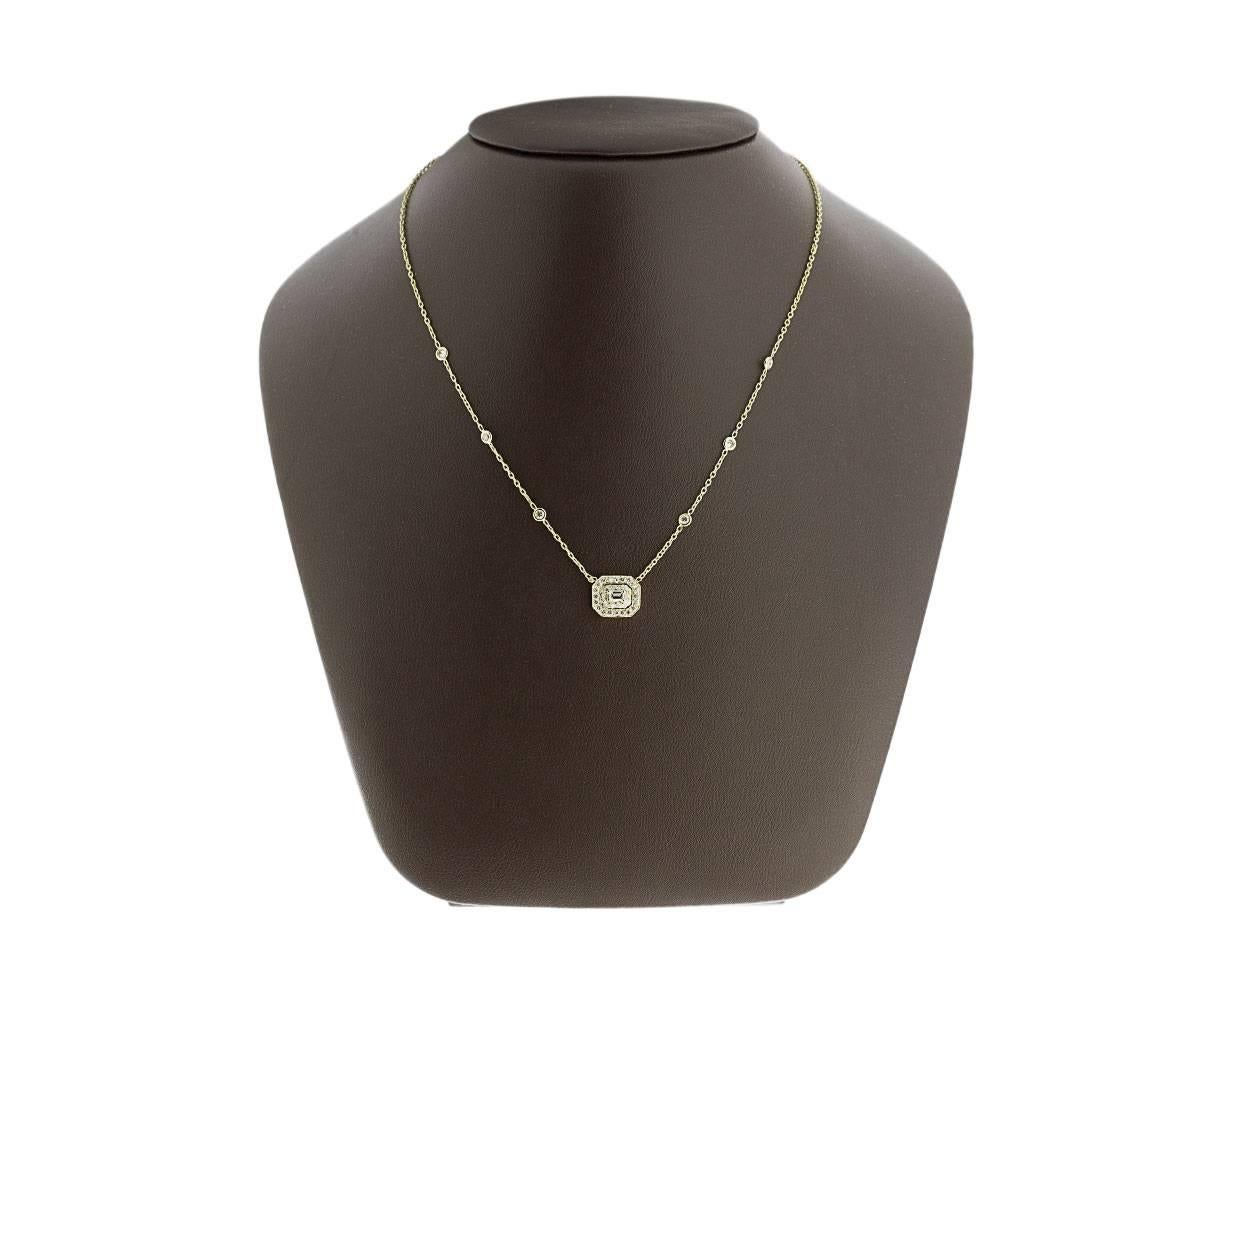 This gorgeous necklace is from the designer Penny Preville, who's been a legend in the jewelry business for over 40 years. Designing classic luxuries from intricate bridal to elegant everyday pieces, Penny captures the essence of what a woman wants